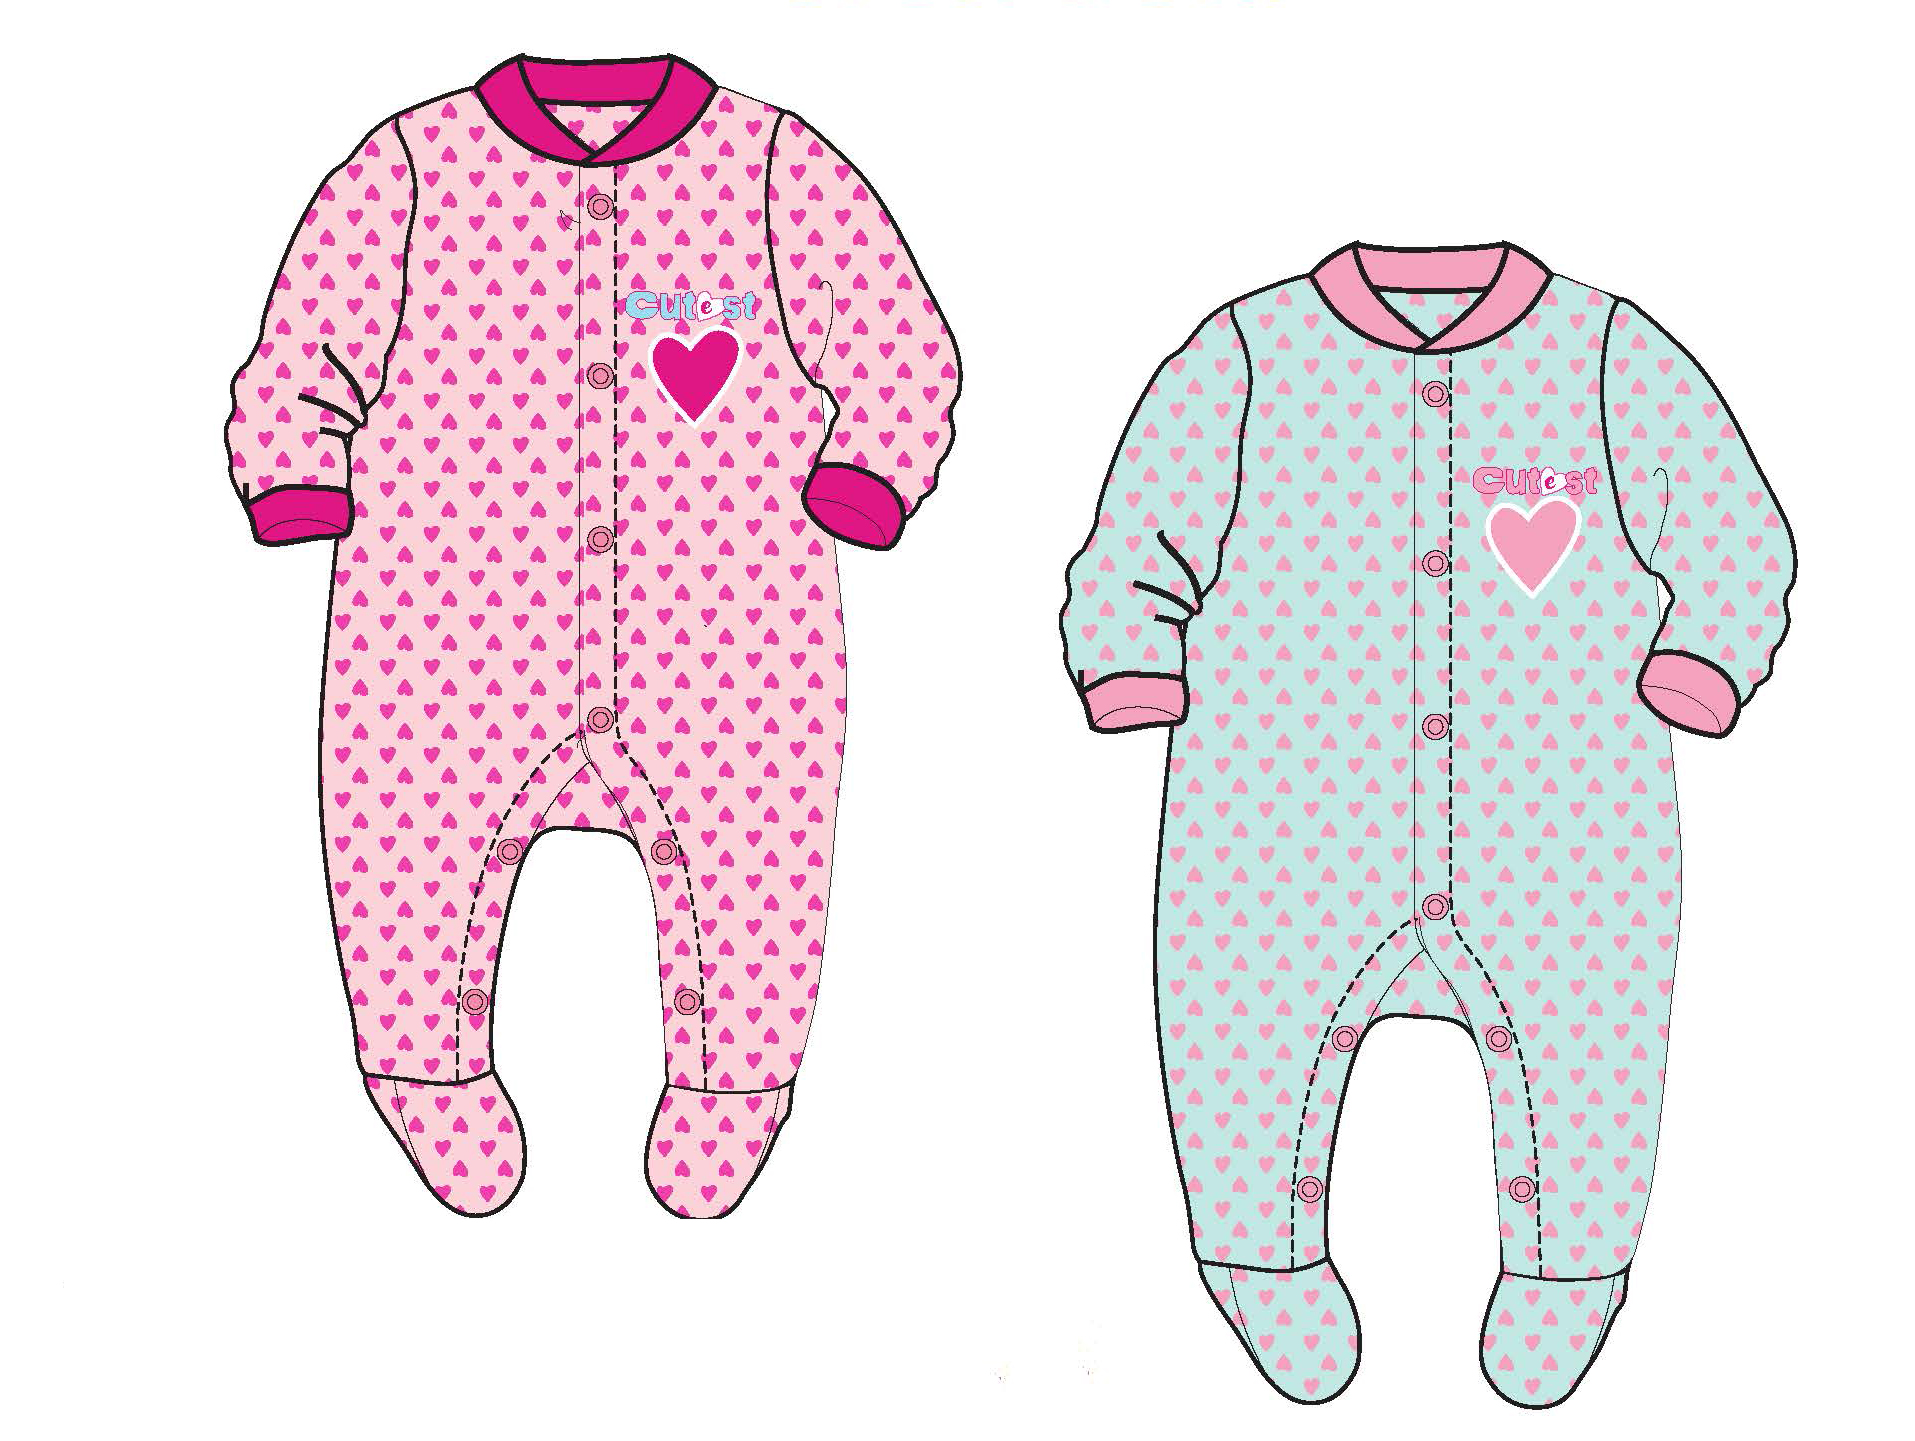 Baby Girl's Knit One-Piece Footed PAJAMAS w/ Embroidered Heart Print - Newborn Size